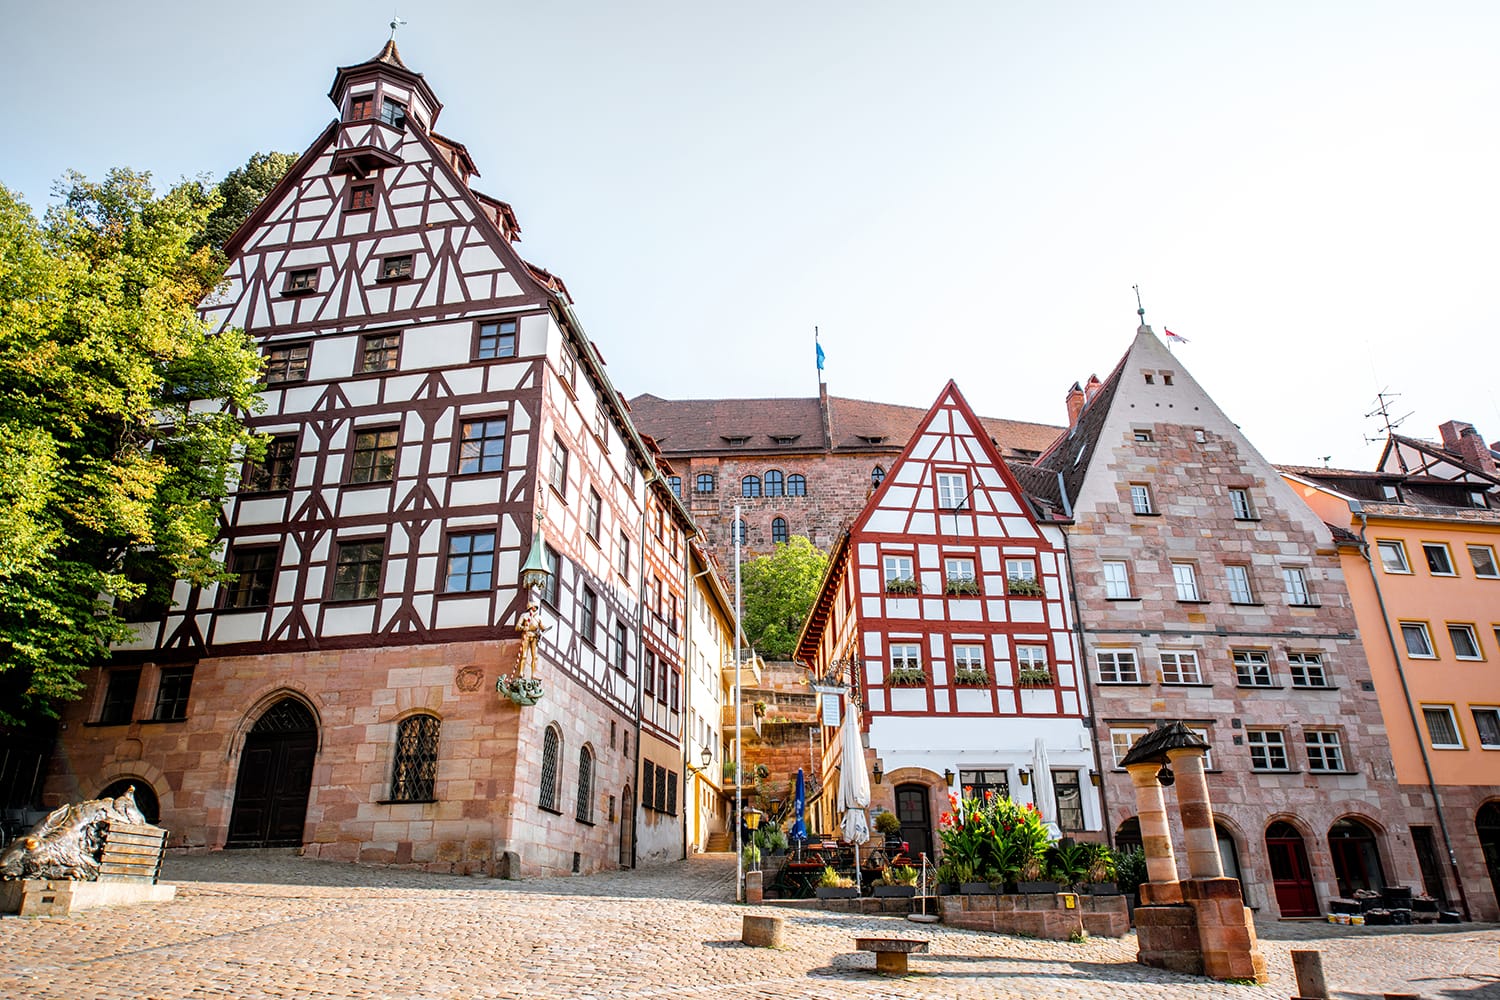 Beautiful half-timbered houses in the old town of Nurnberg, Germany